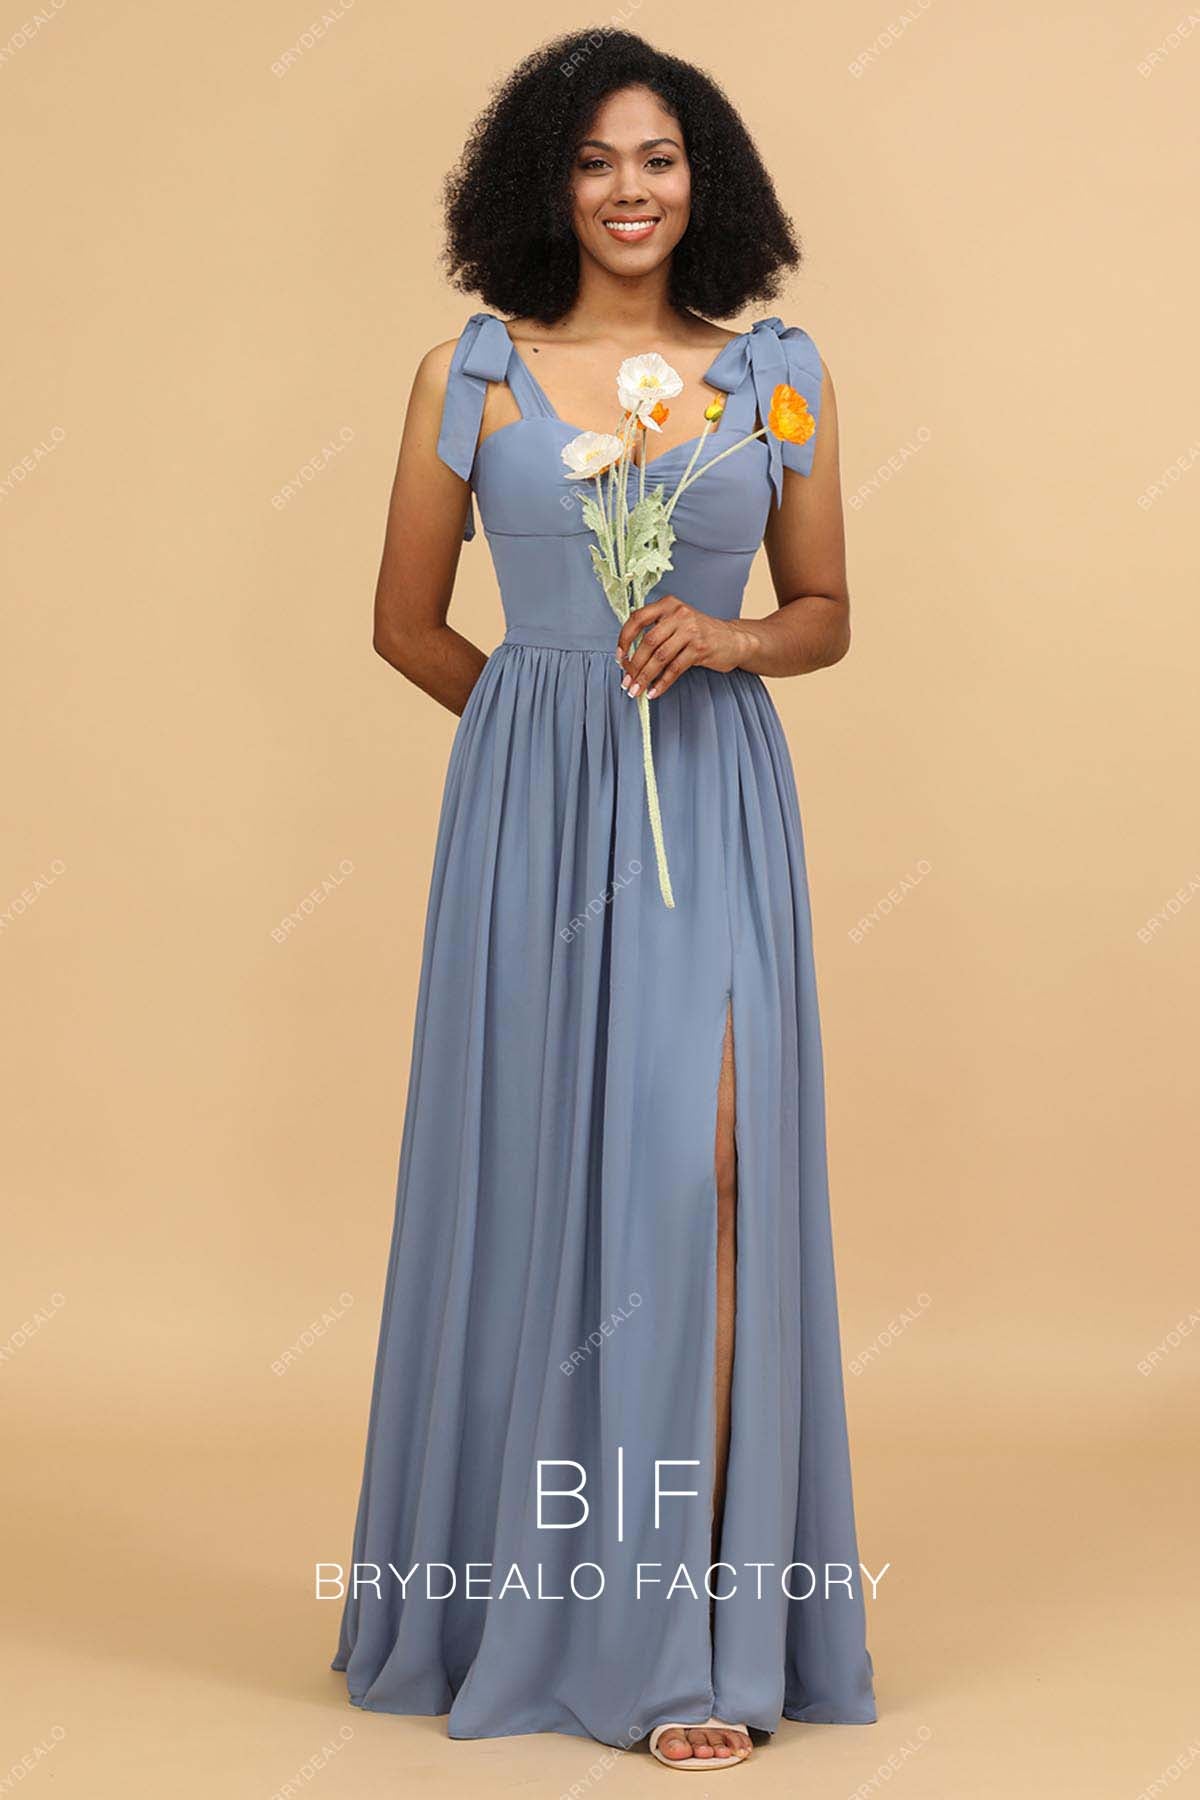 Dusty Blue Shoulder Tie Ruched Sweetheart Empire Bridesmaid Dress